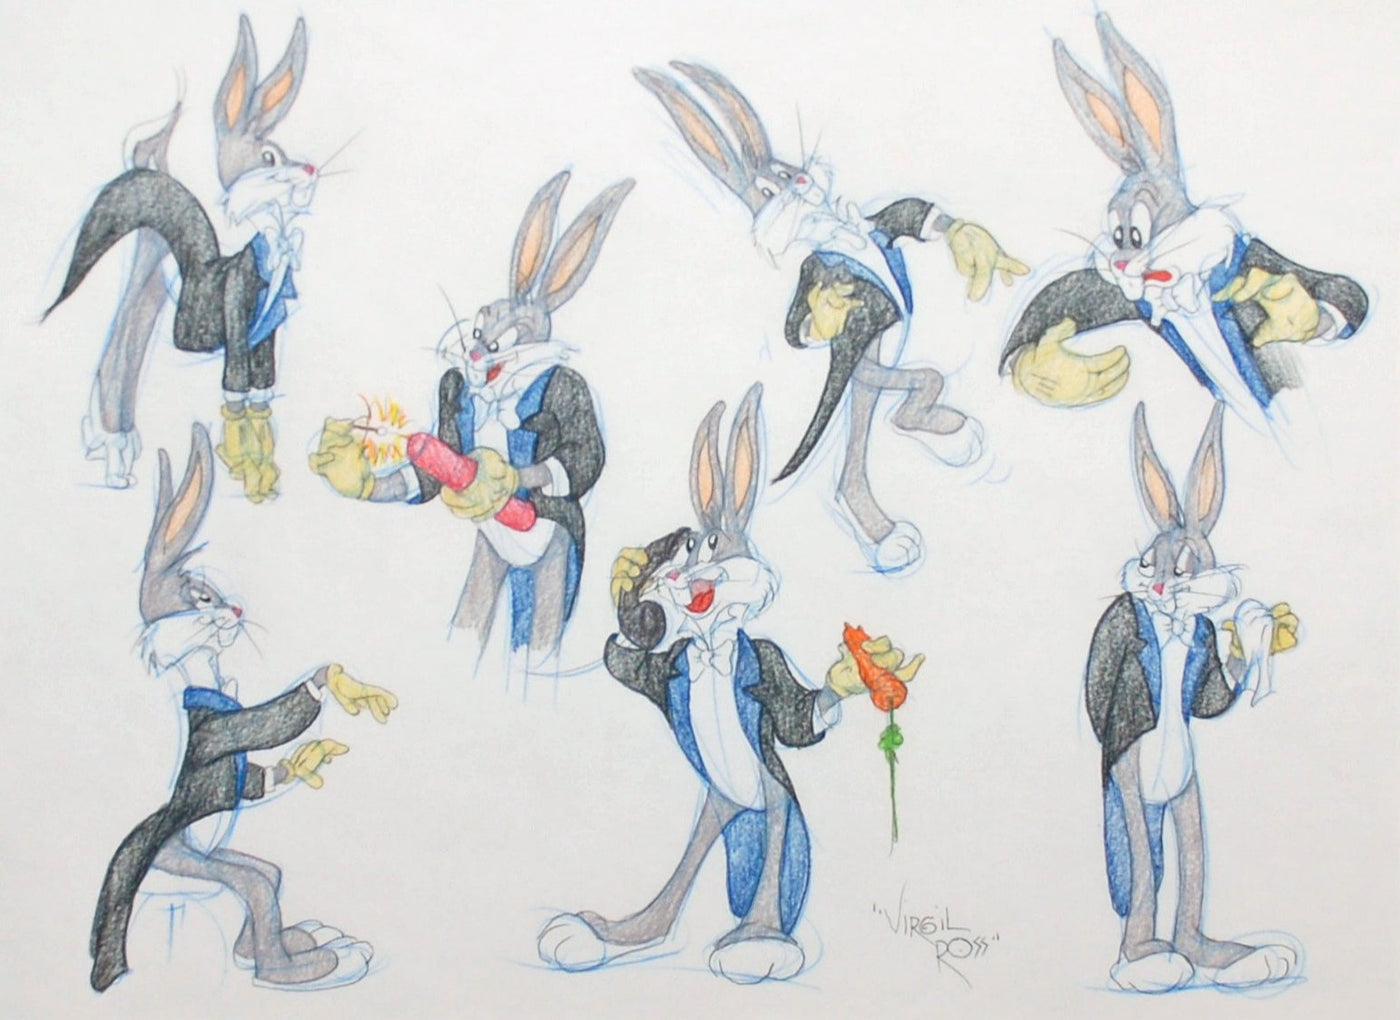 Original Warner Brothers Model Drawing featuring Bugs Bunny